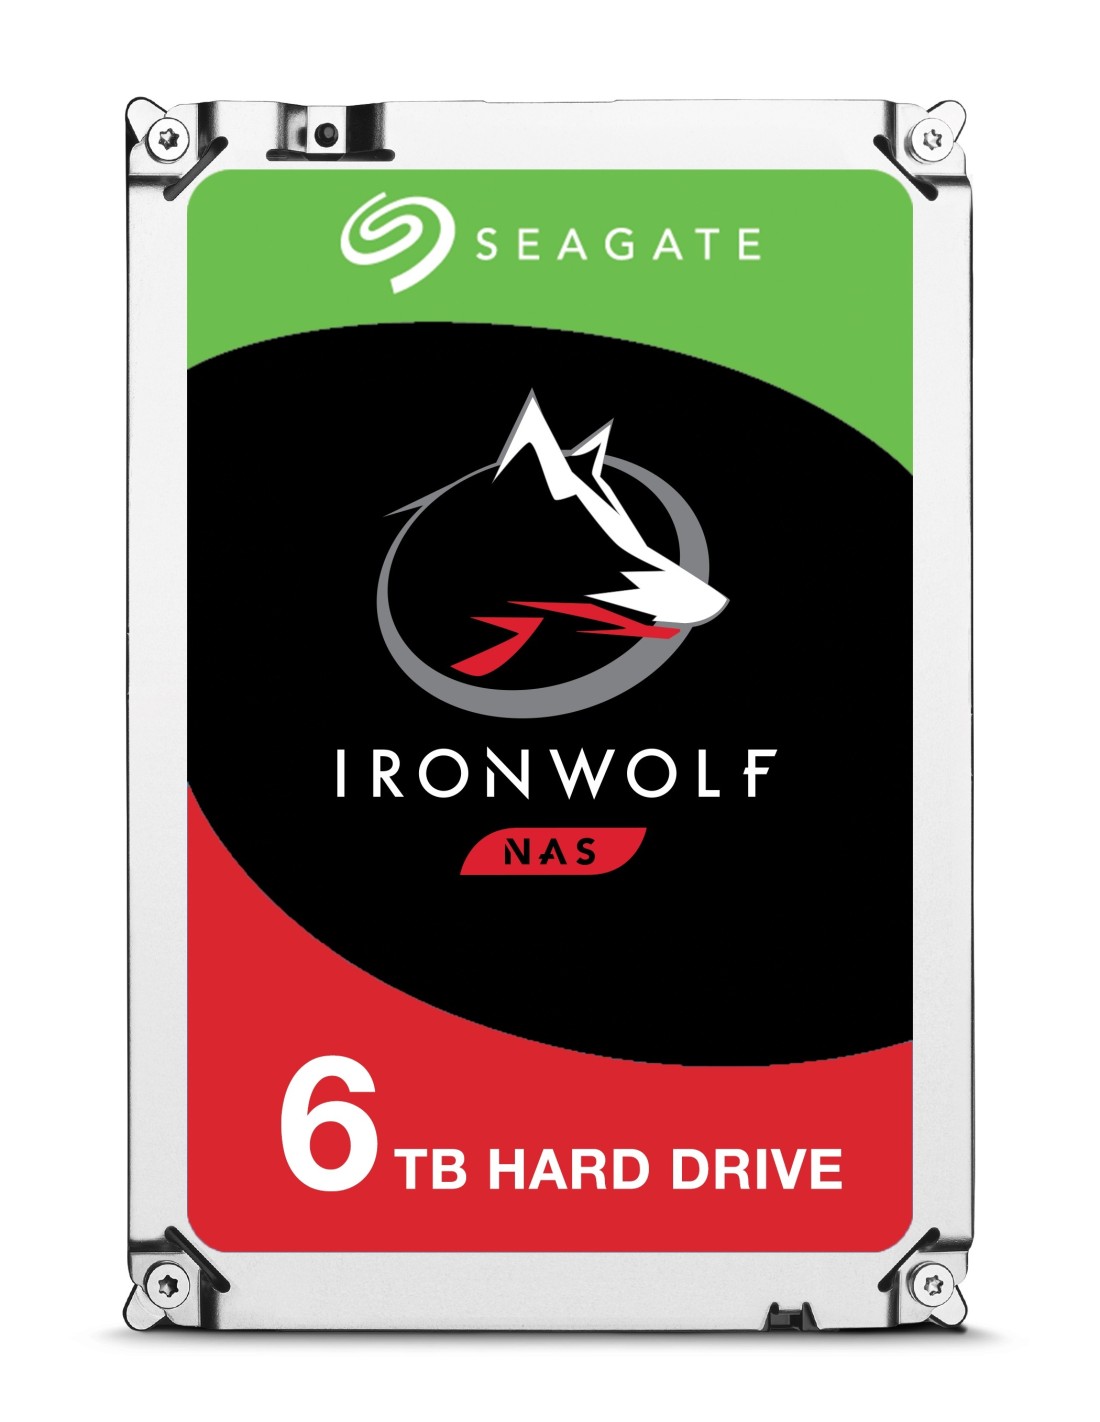 Hard Drive ST6000VN001 6TB HDD 3.5" Edition IRONWOLF NAS 5400RPM 256MB.